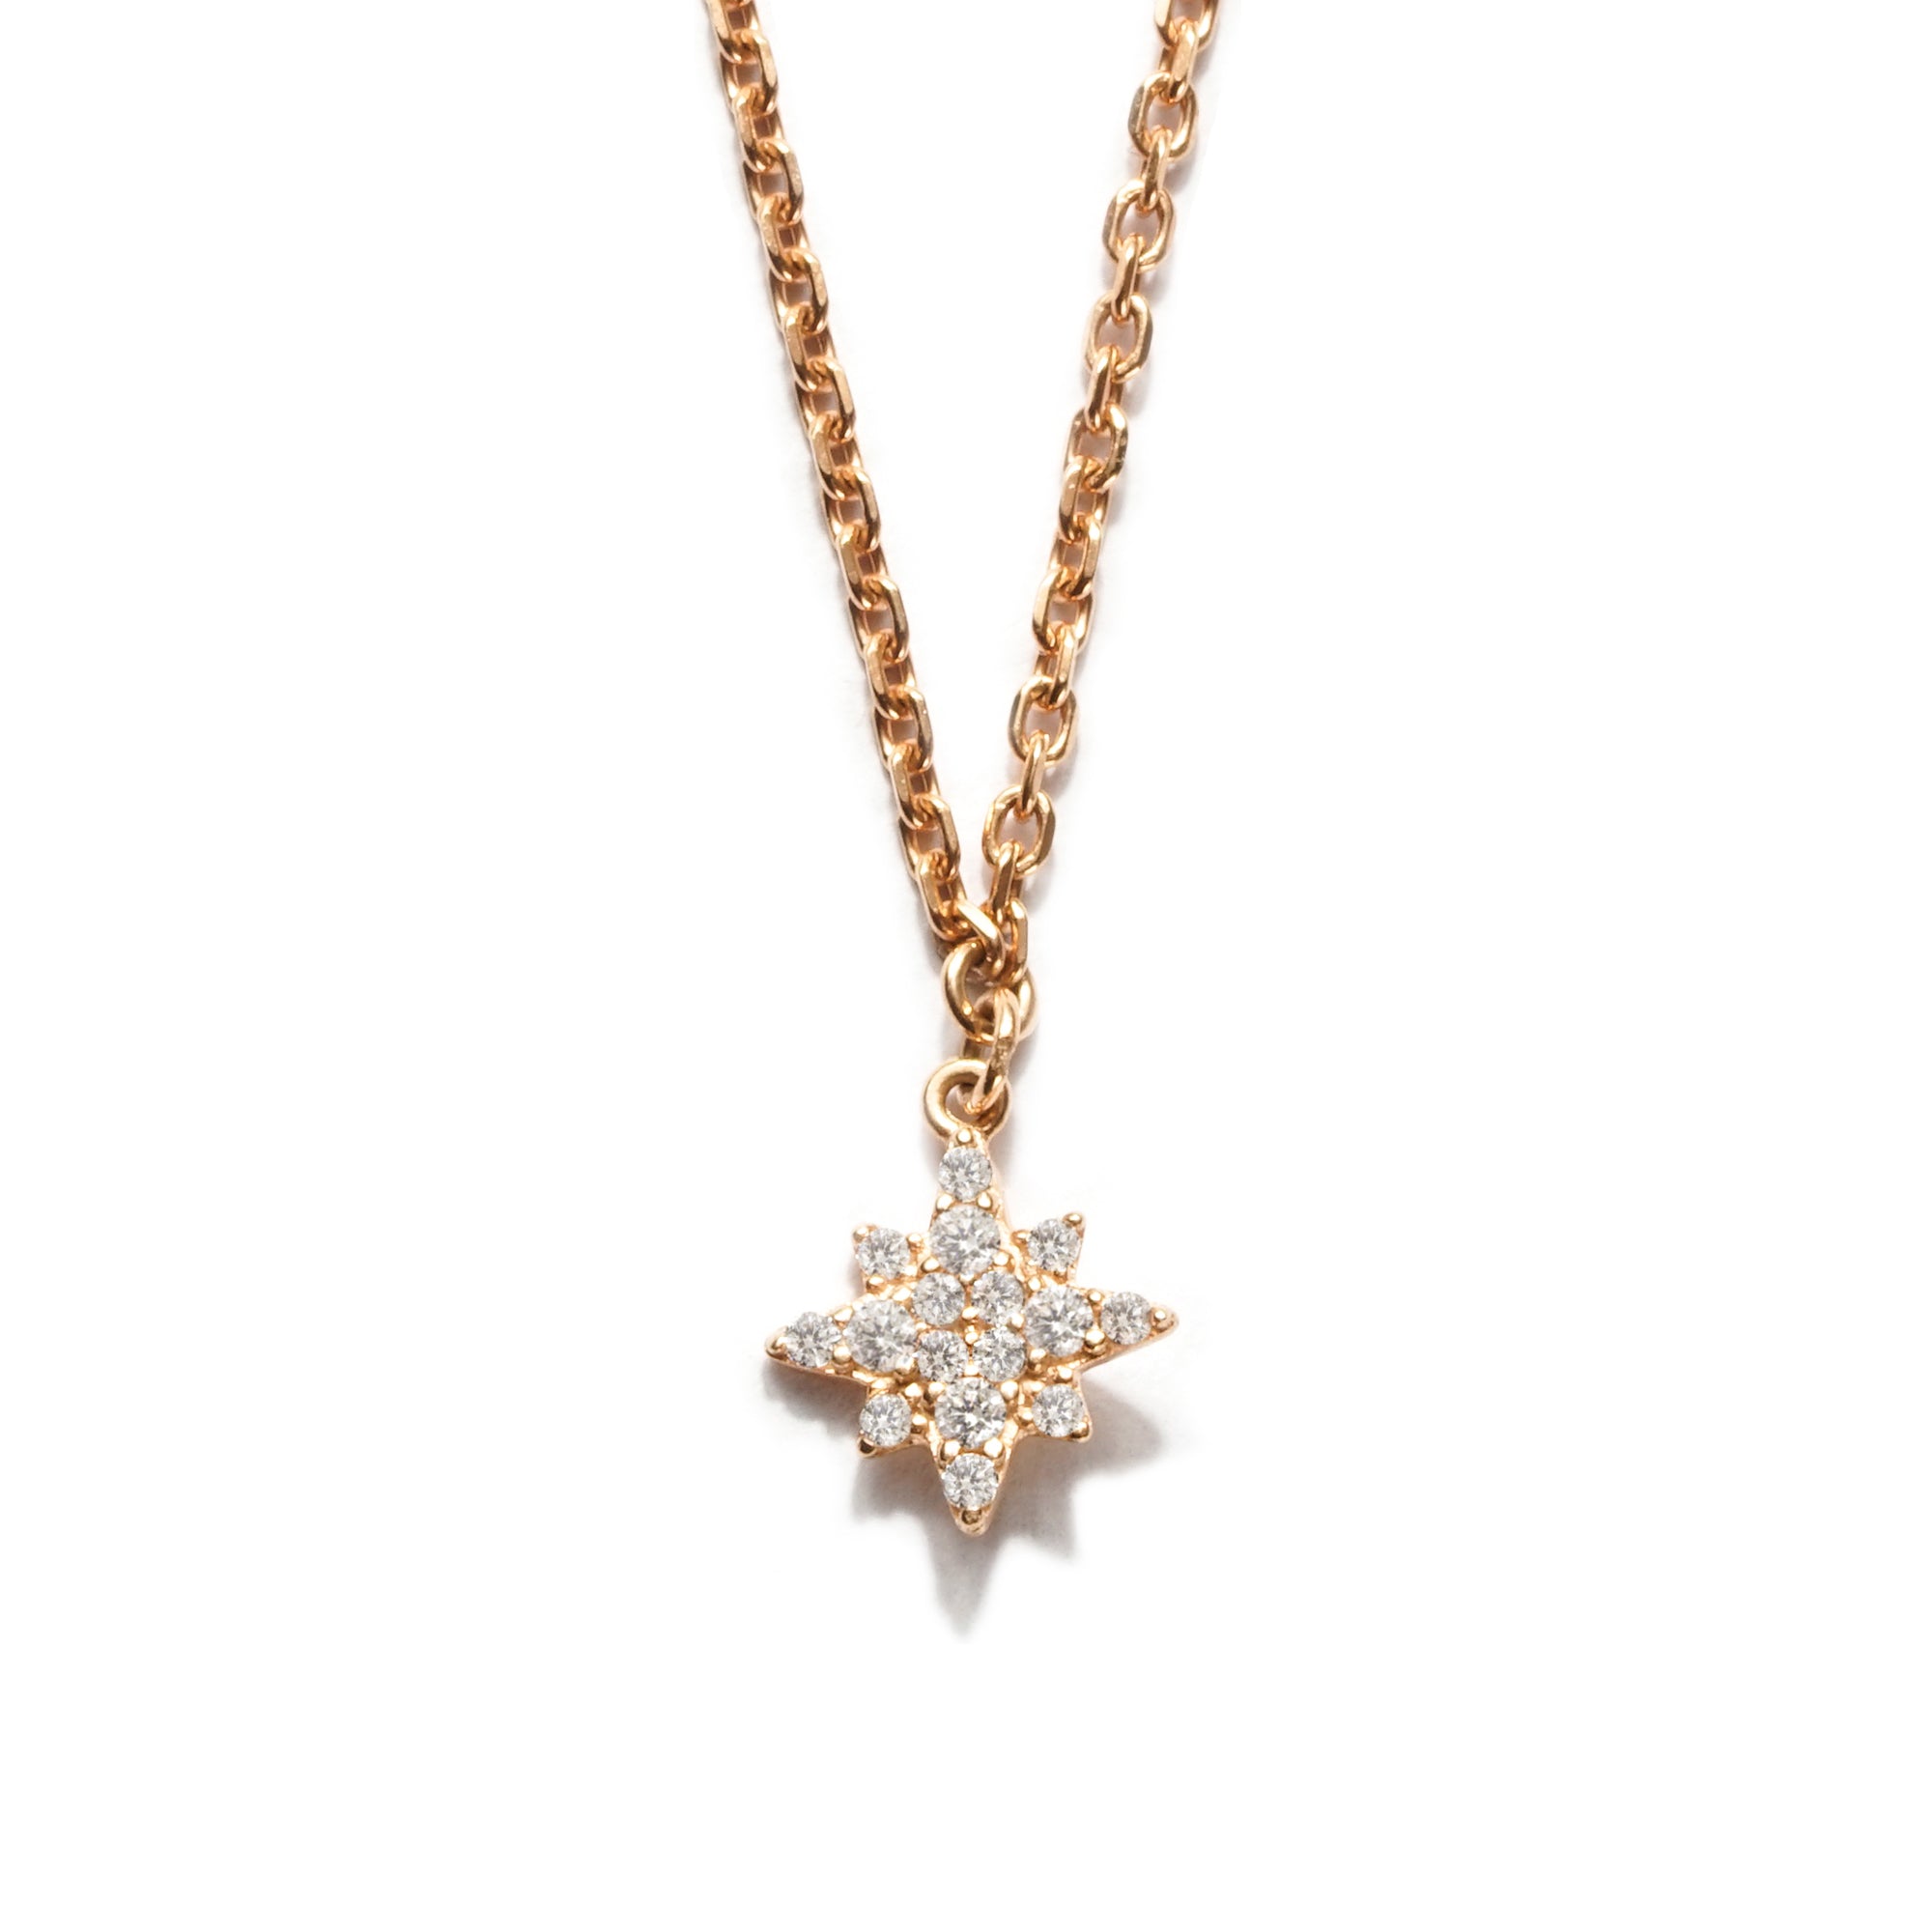 Fearless Gold Necklace - Alura - Juene Jewelry